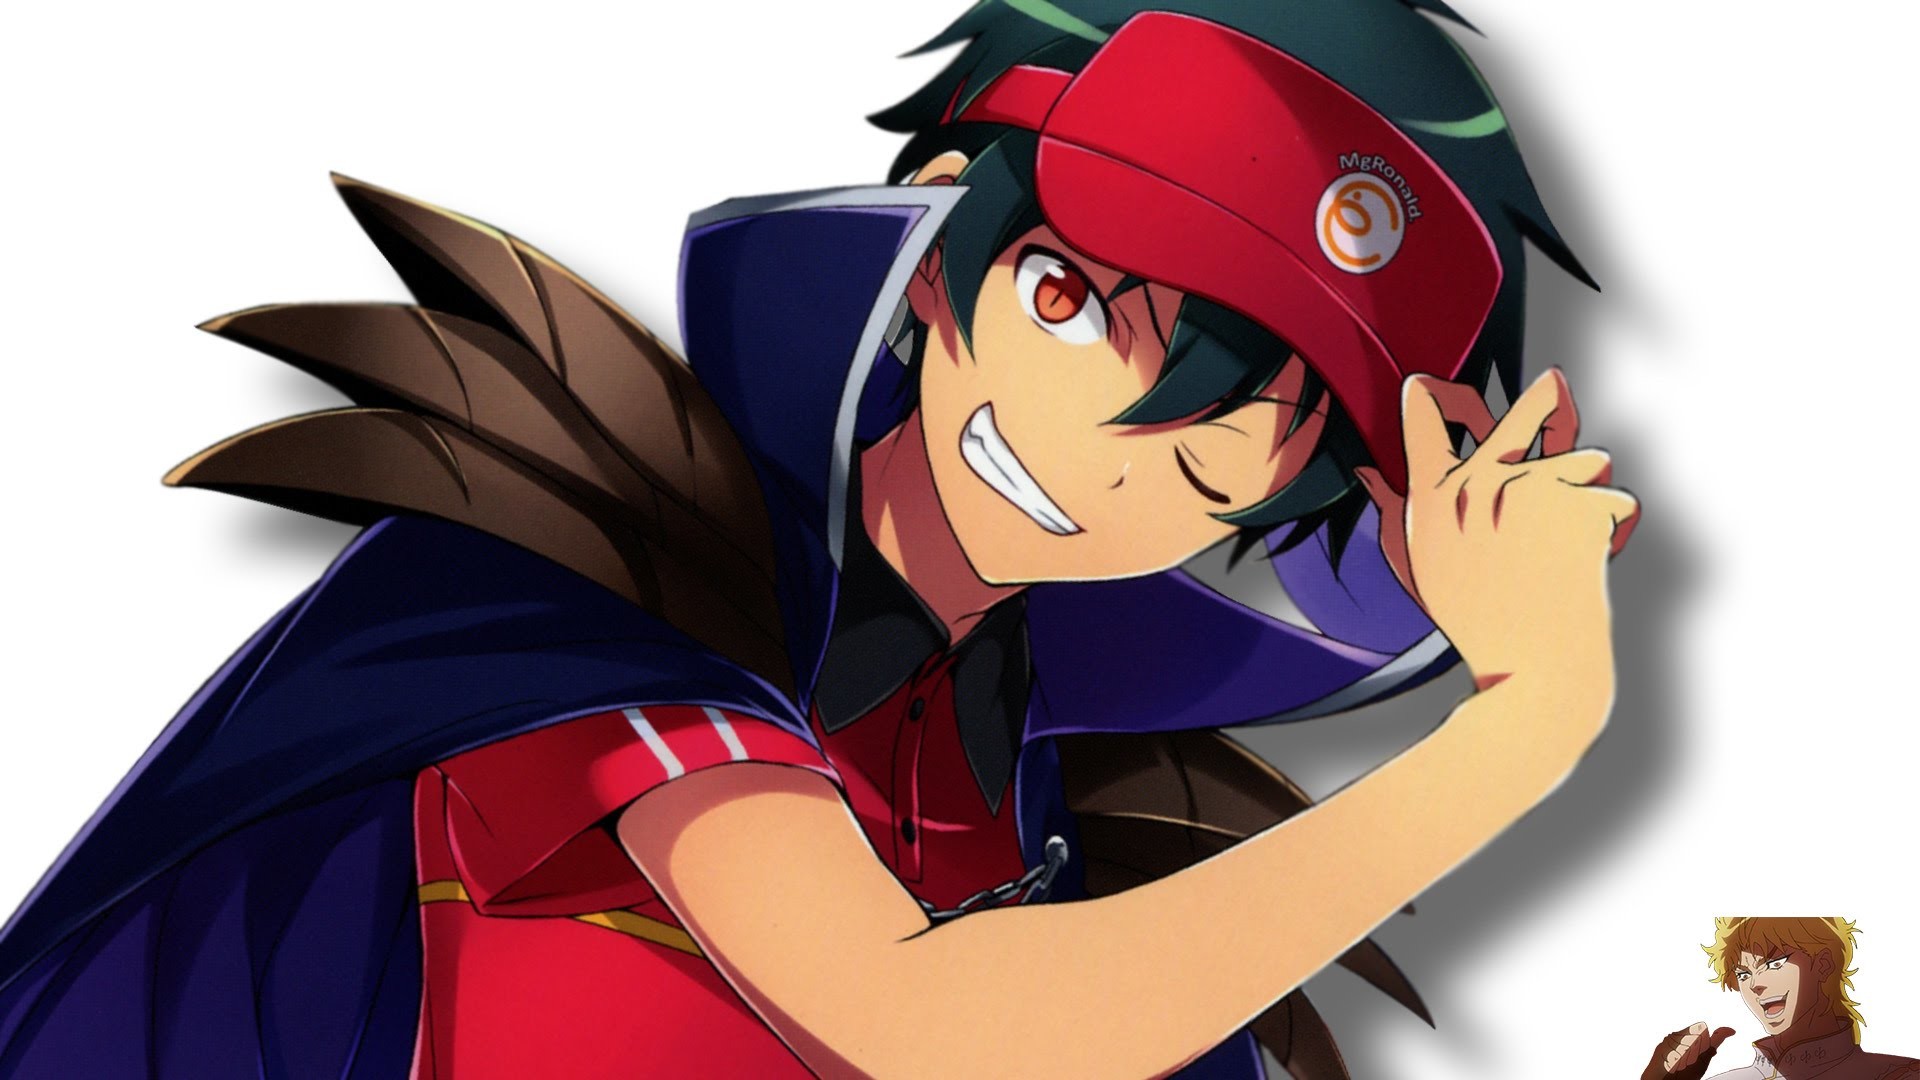 1920x1080 The Devil is a Part Timer: SO FUNNY! MUST SEE! - Anime Review #62